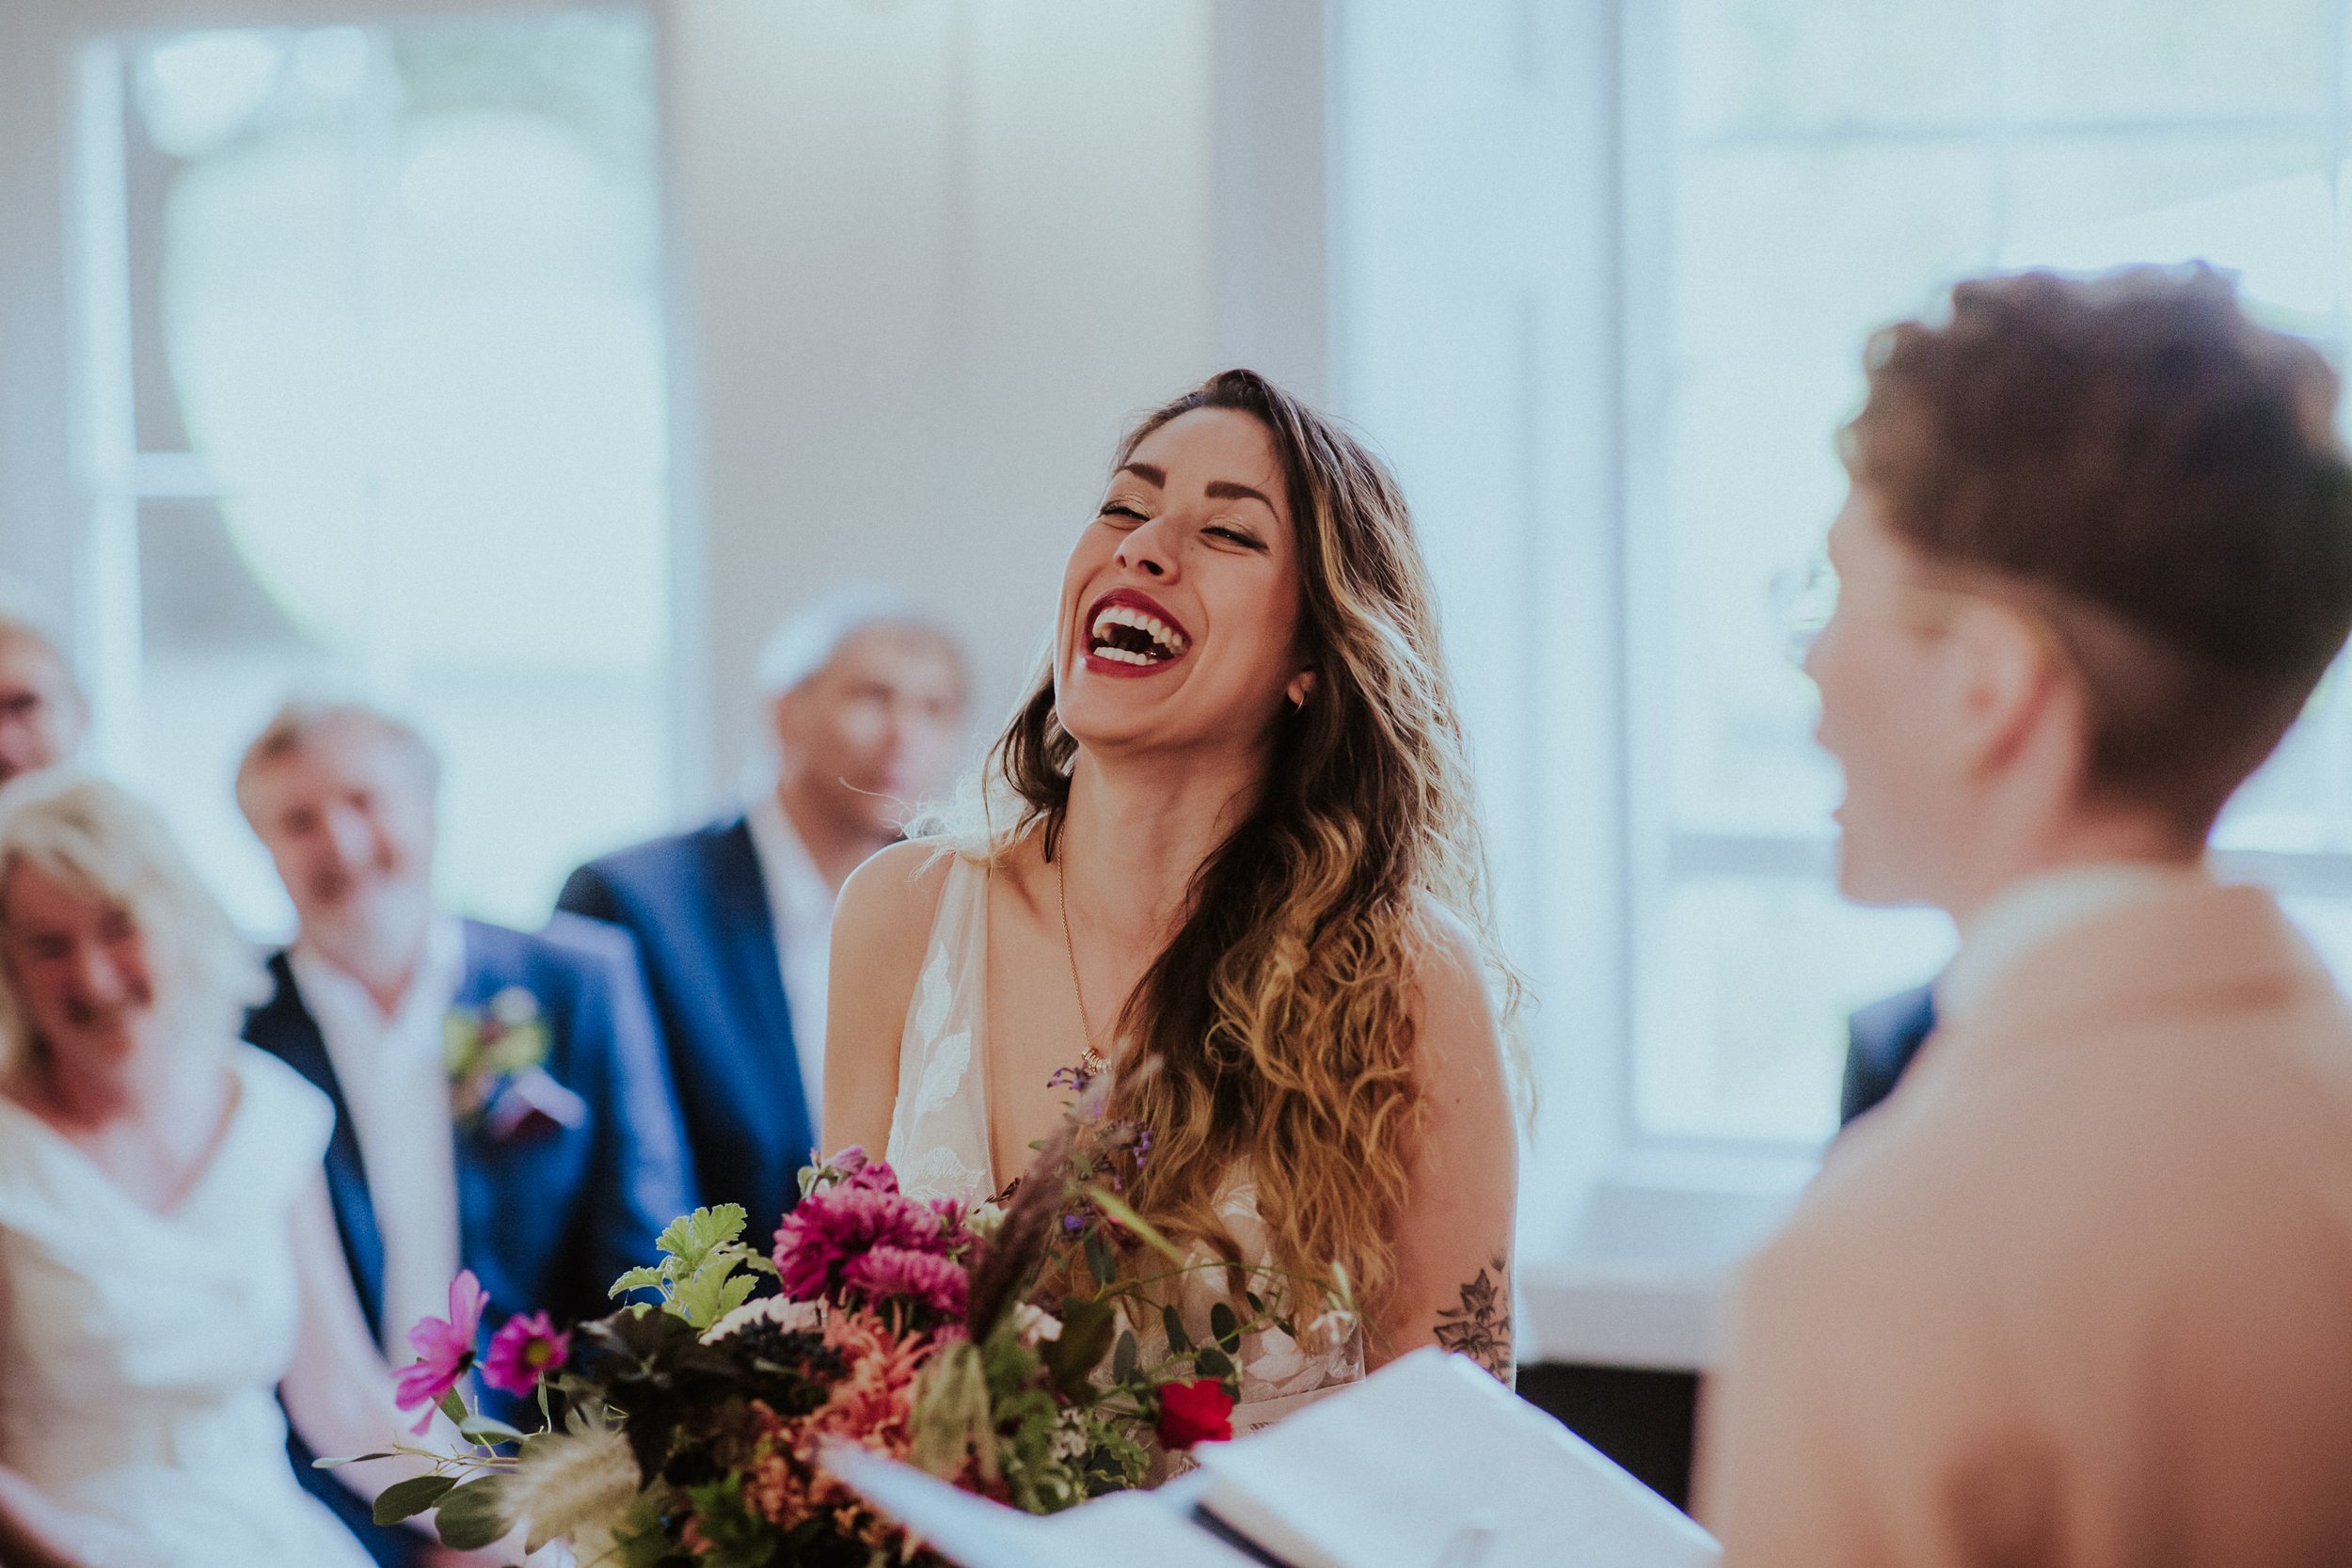  Bride is photographed laughing as she reacts to a funny part in the wedding ceremony crafted by the cool, modern celebrant who can be seen blurred at the forefront of the image.   Photo by: Steven Haddock Photography 